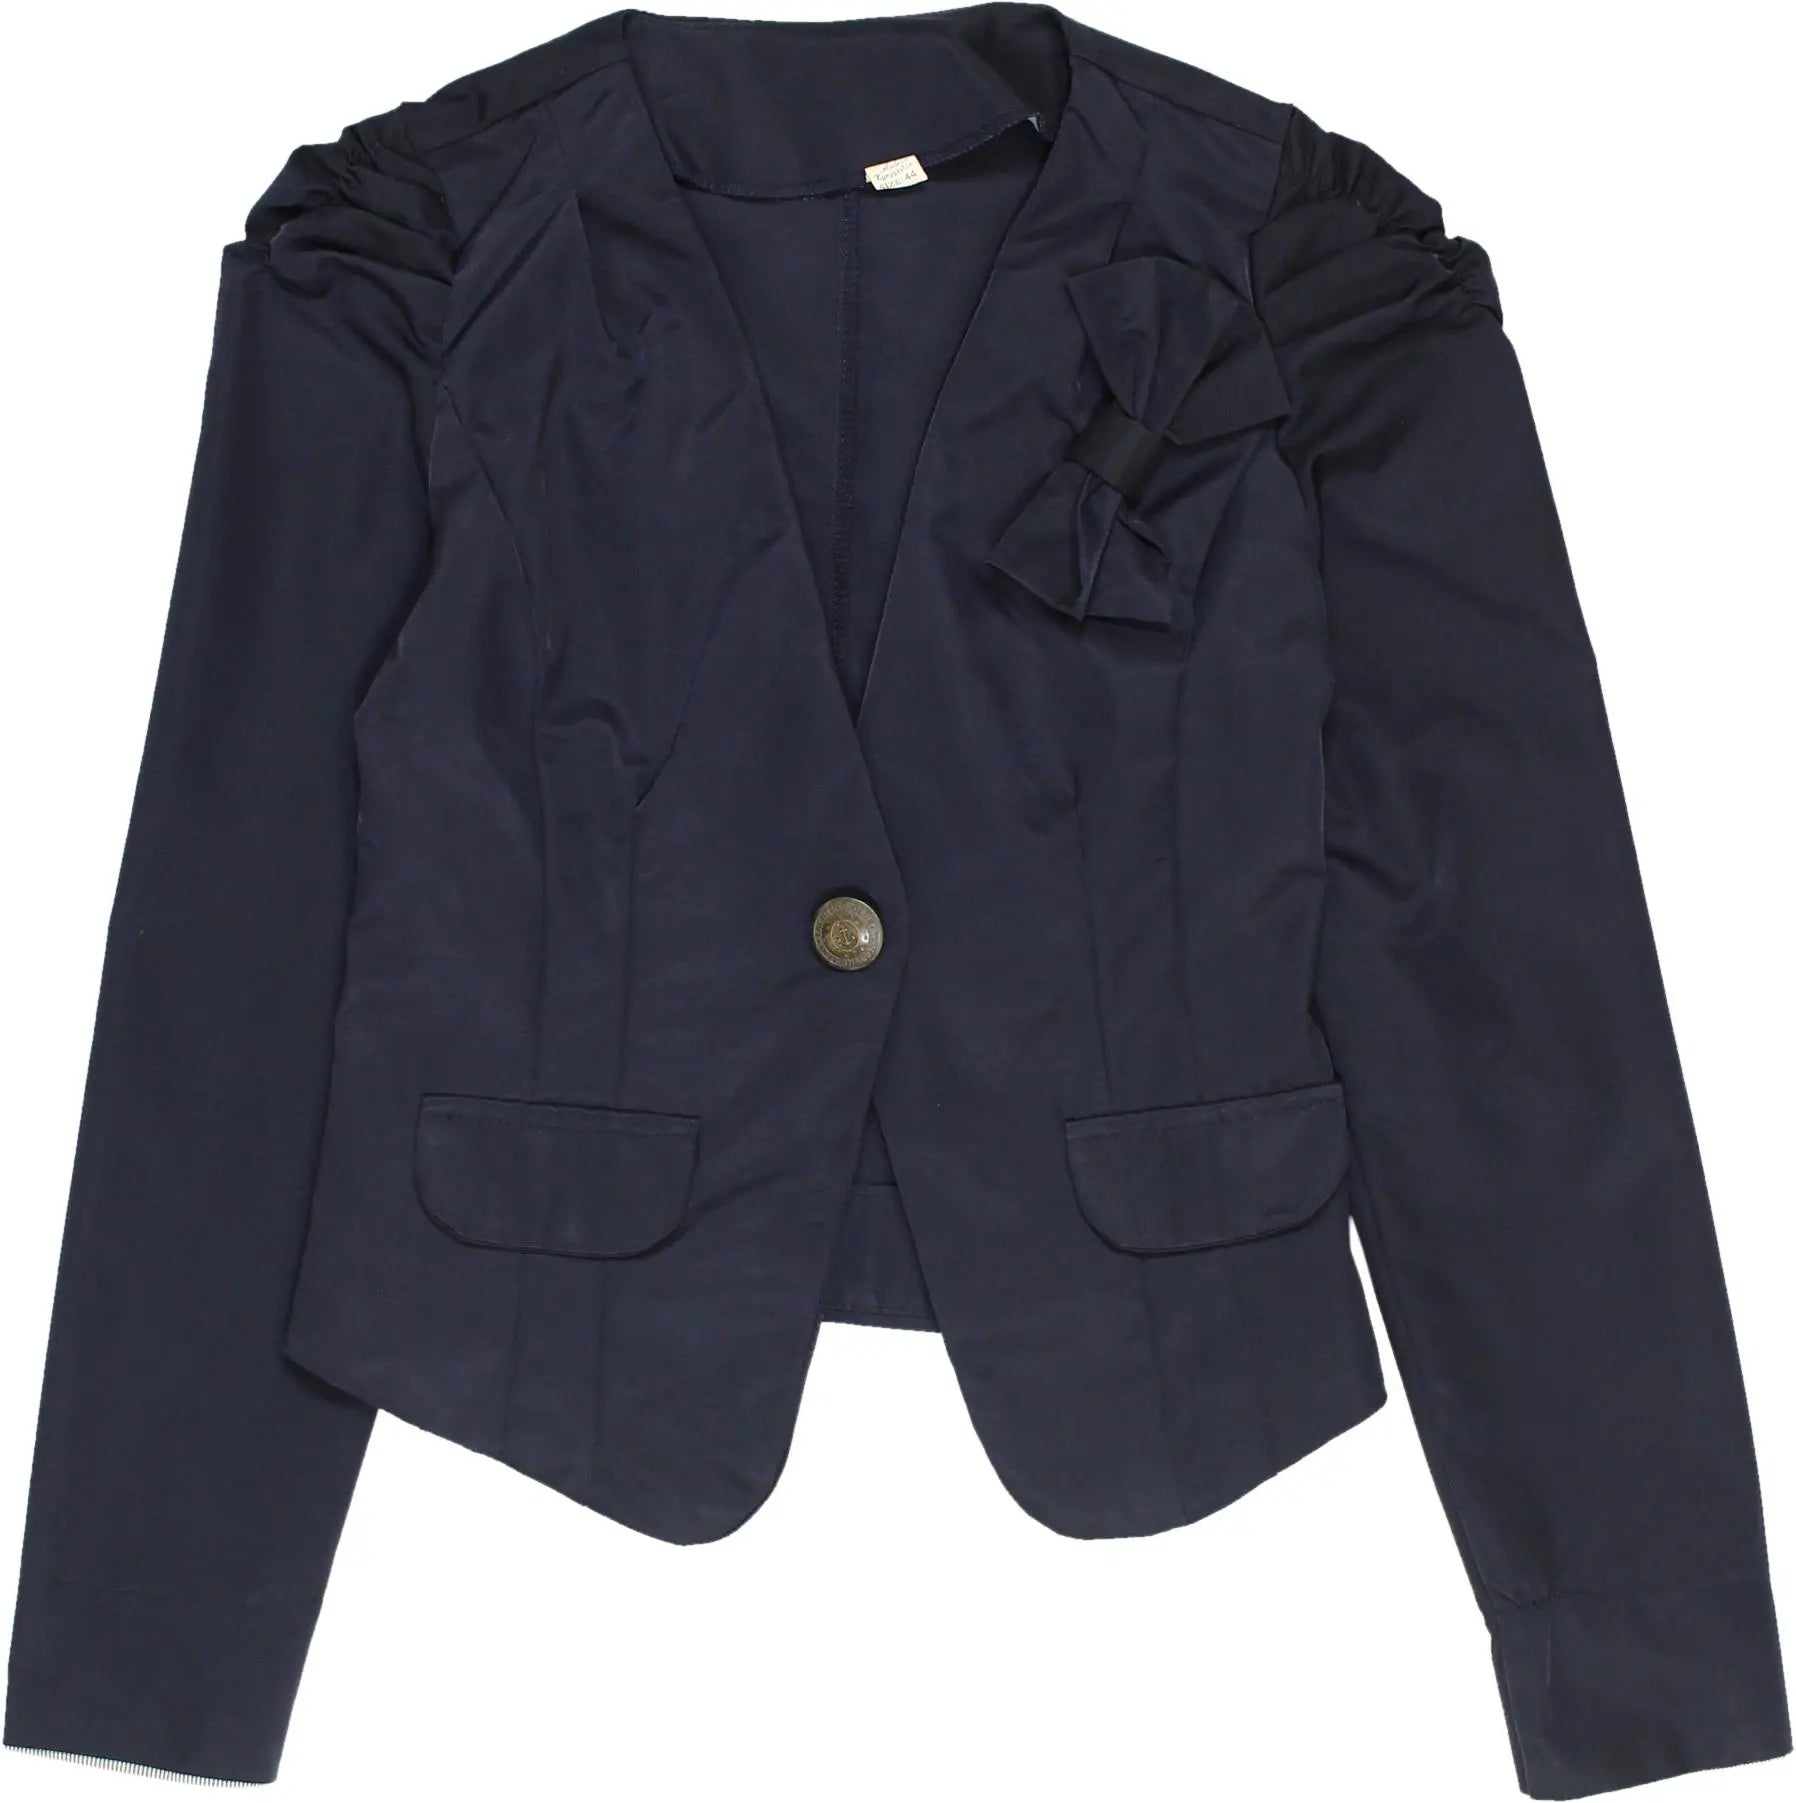 Unknown - Blazer with Bow- ThriftTale.com - Vintage and second handclothing